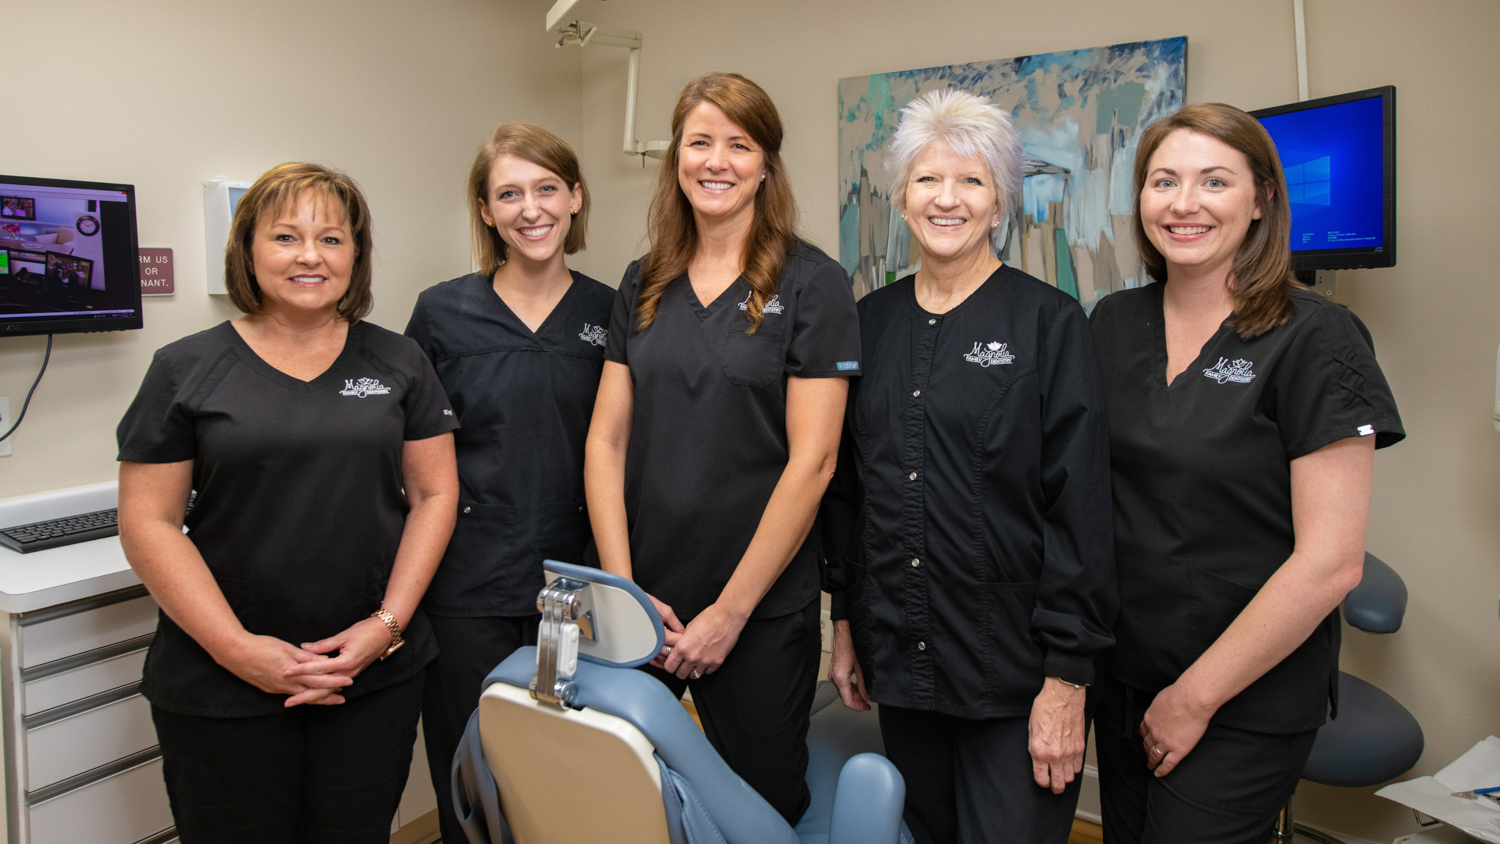 Where Contemporary Dentistry Meets Small Town Care